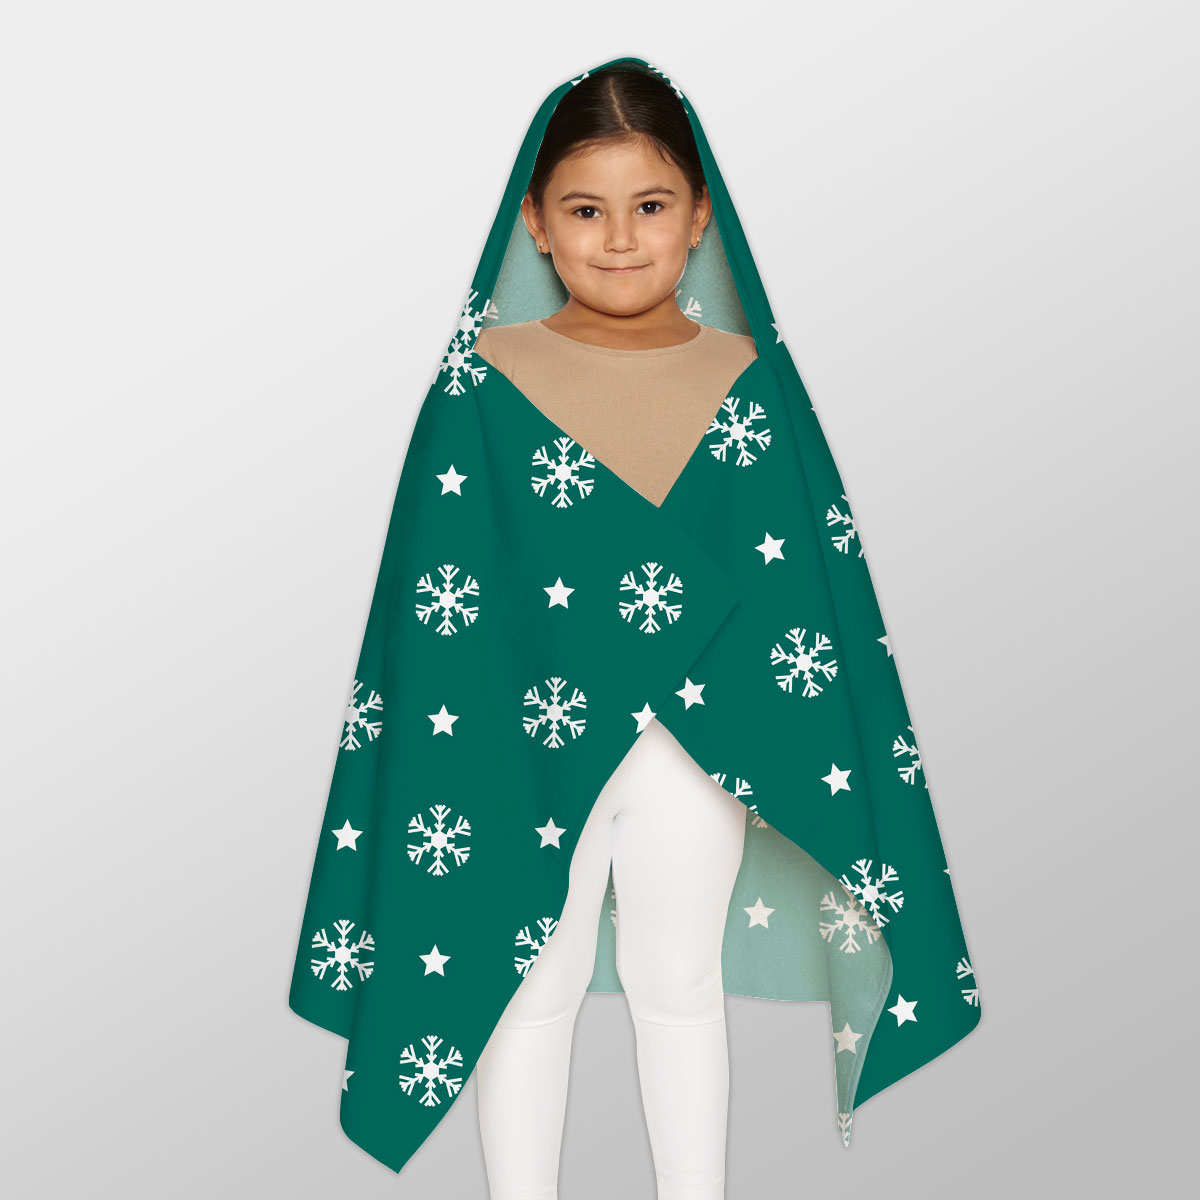 White And Dark Green Snowflake With Christmas Star Youth Hooded Towel